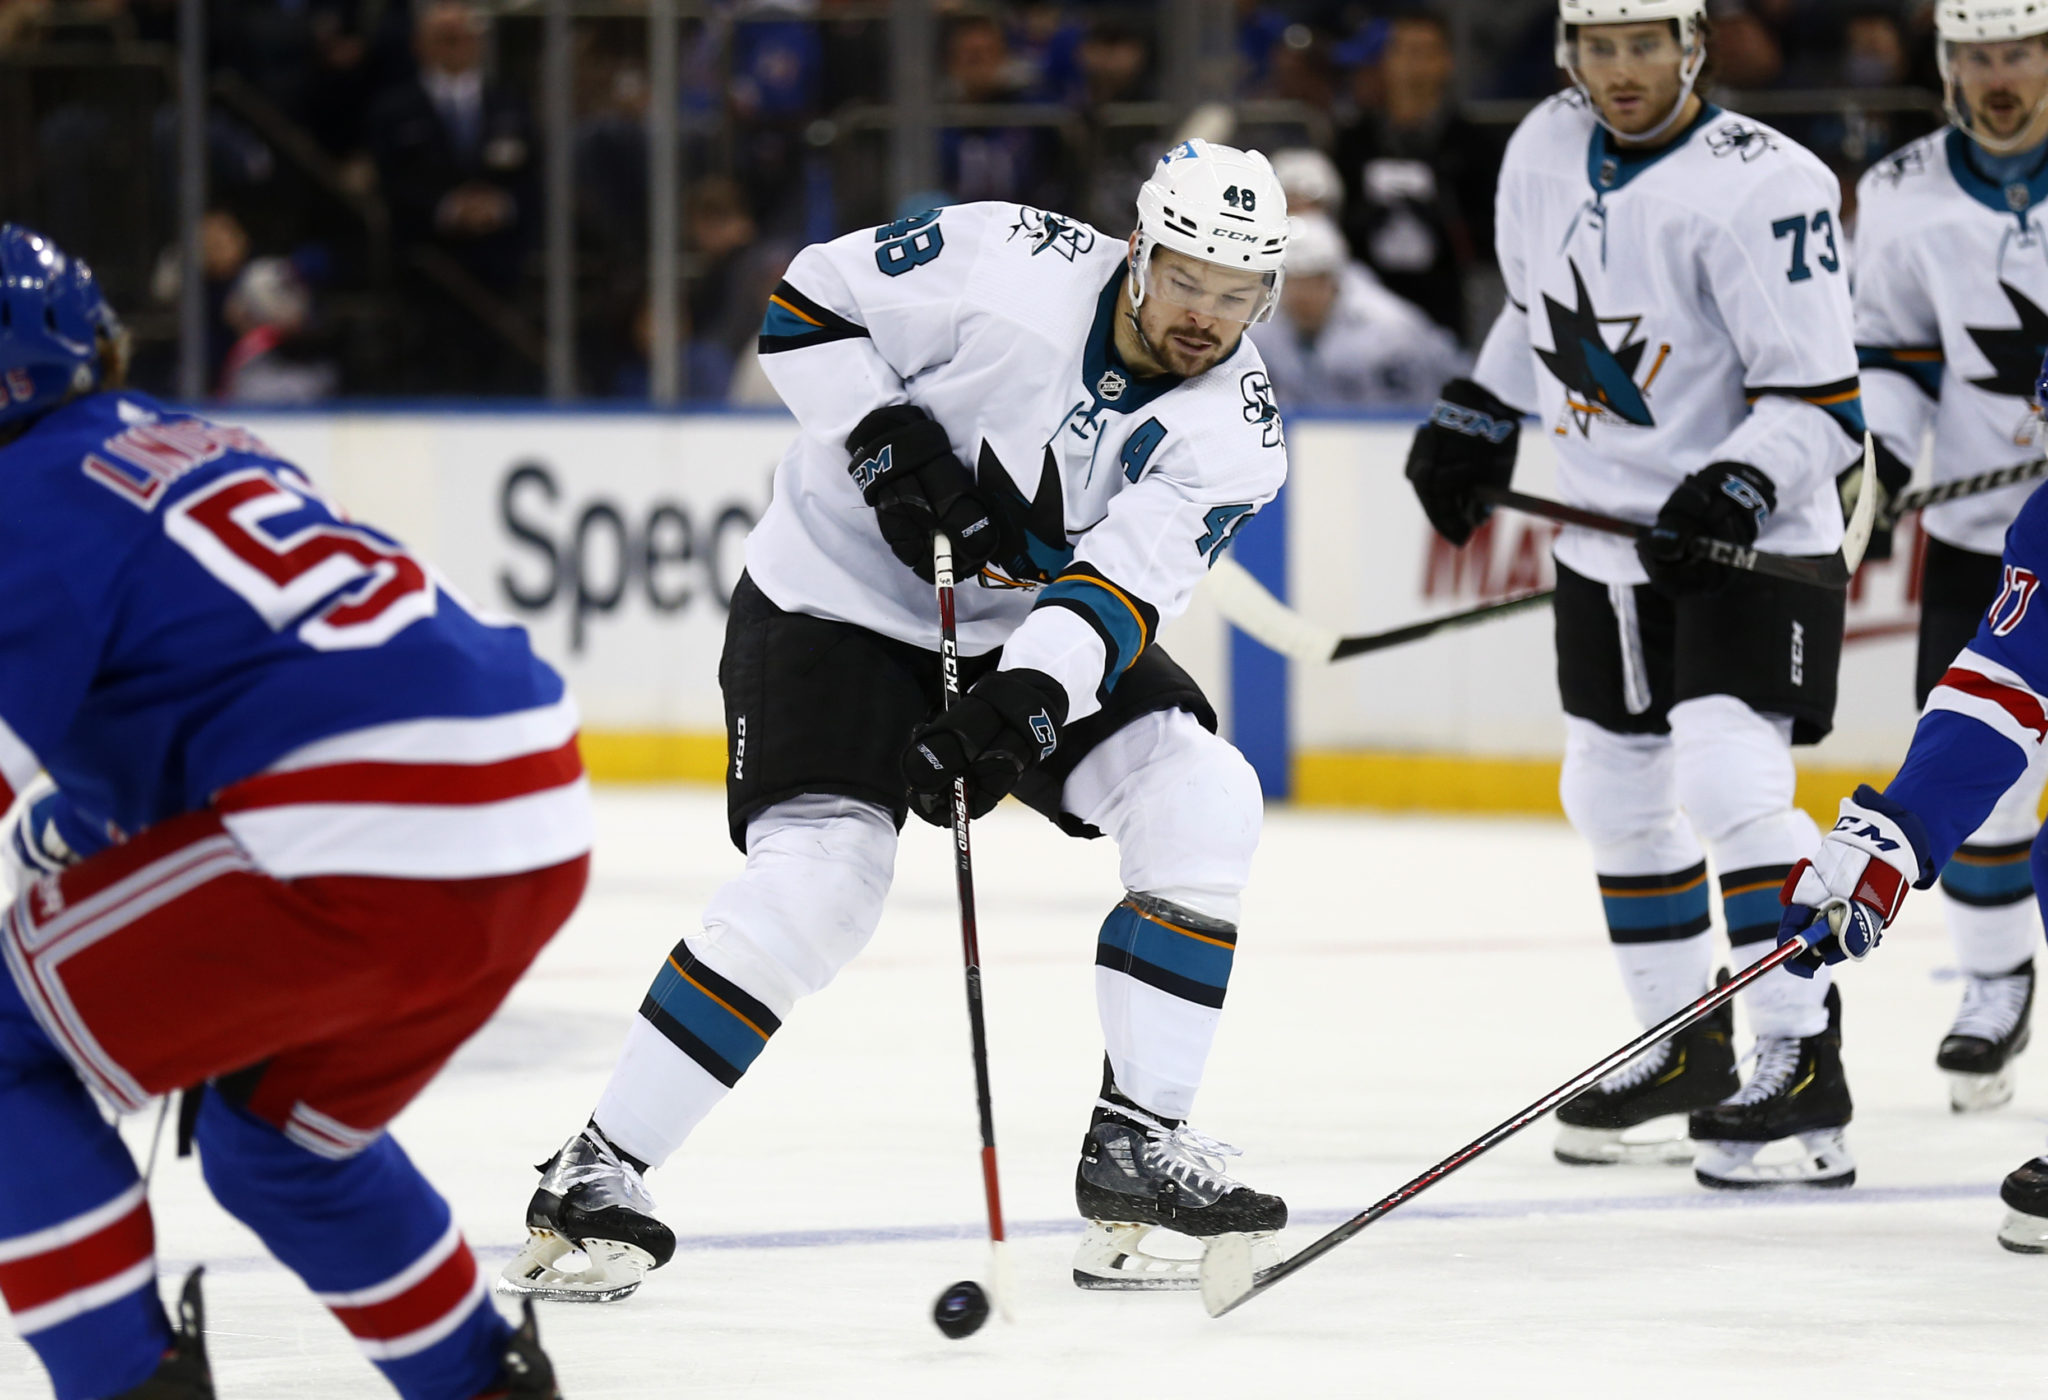 NHL: San Jose Sharks like team”s chances to win Stanley Cup